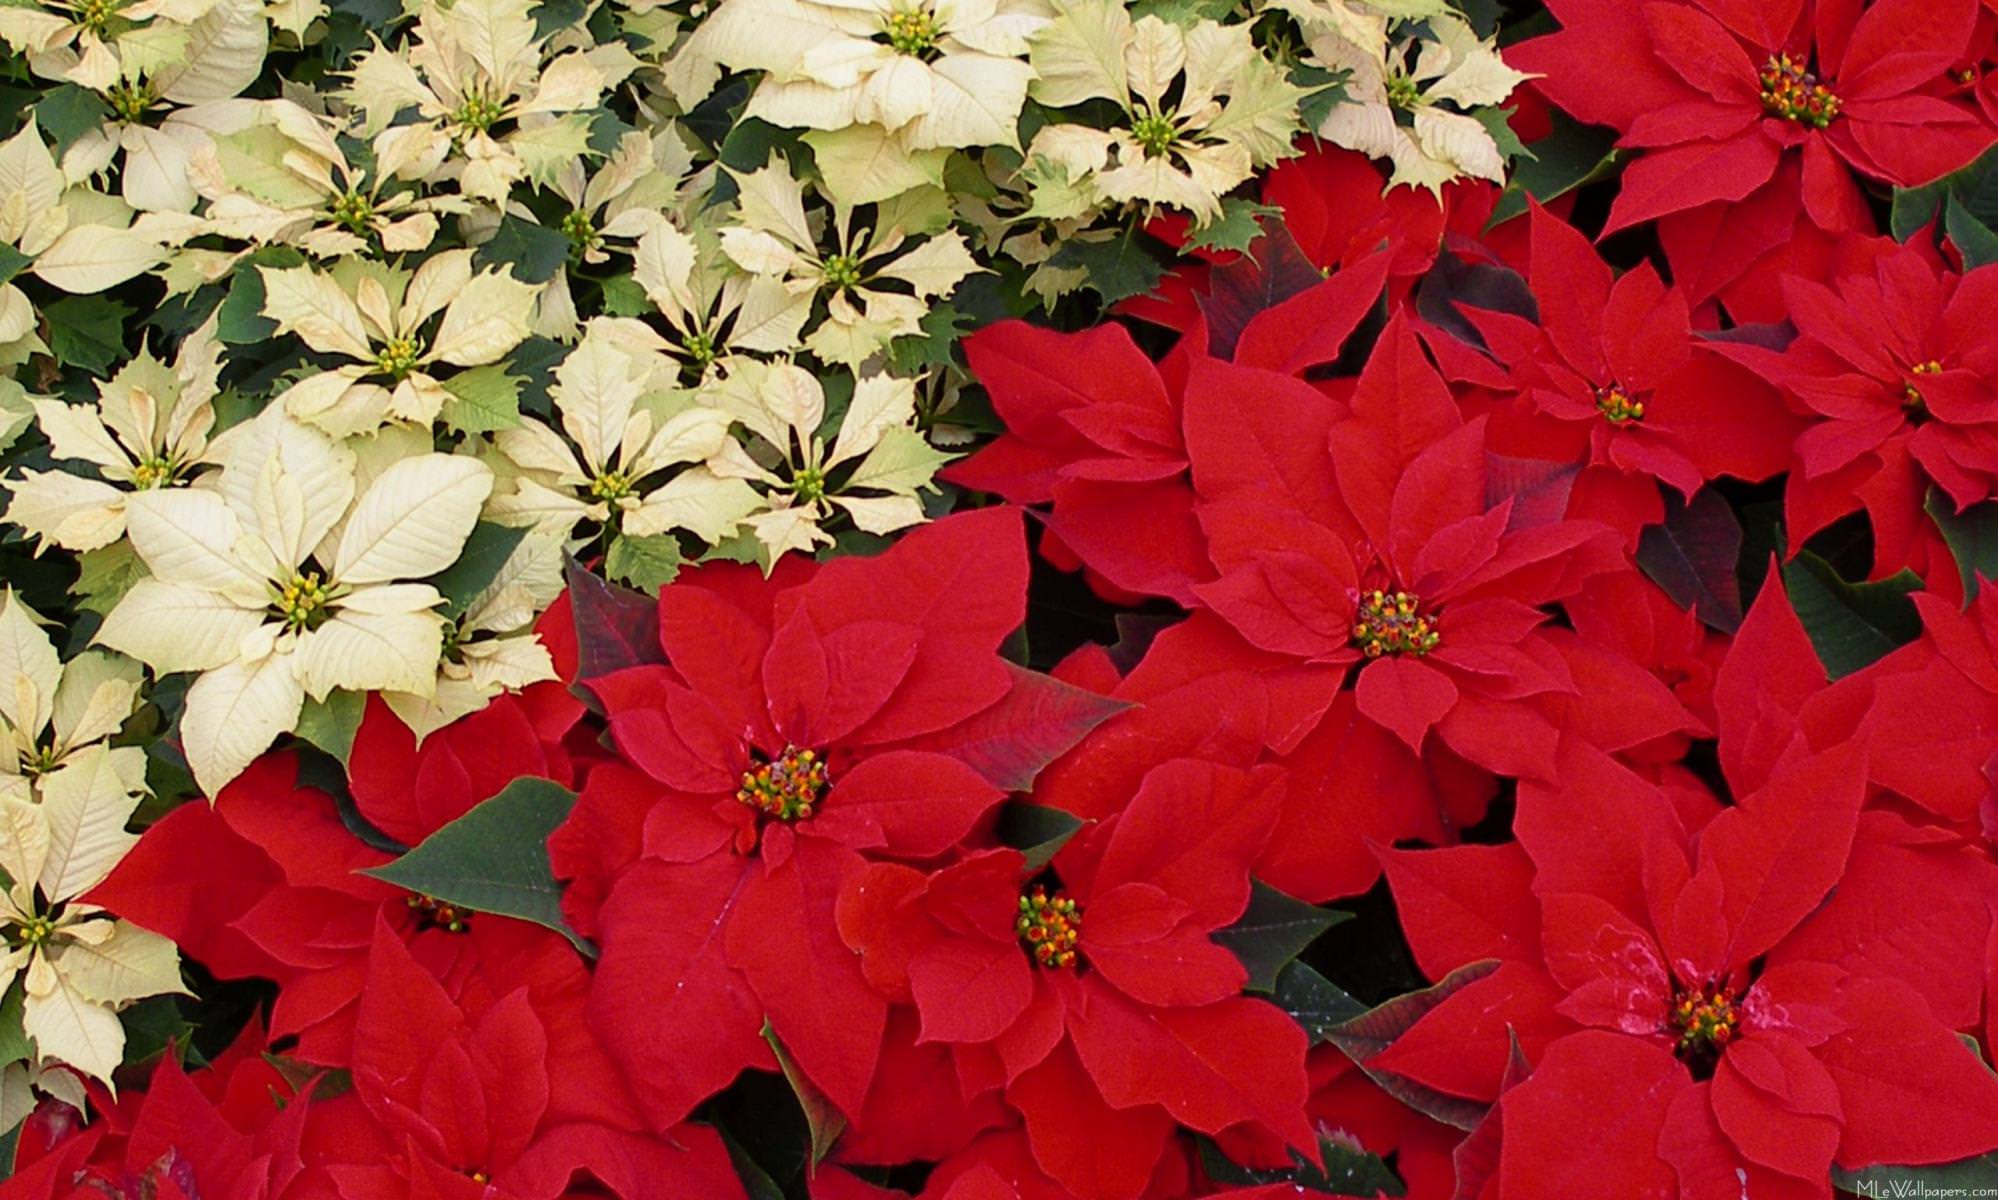 MLe and Red Poinsettias I